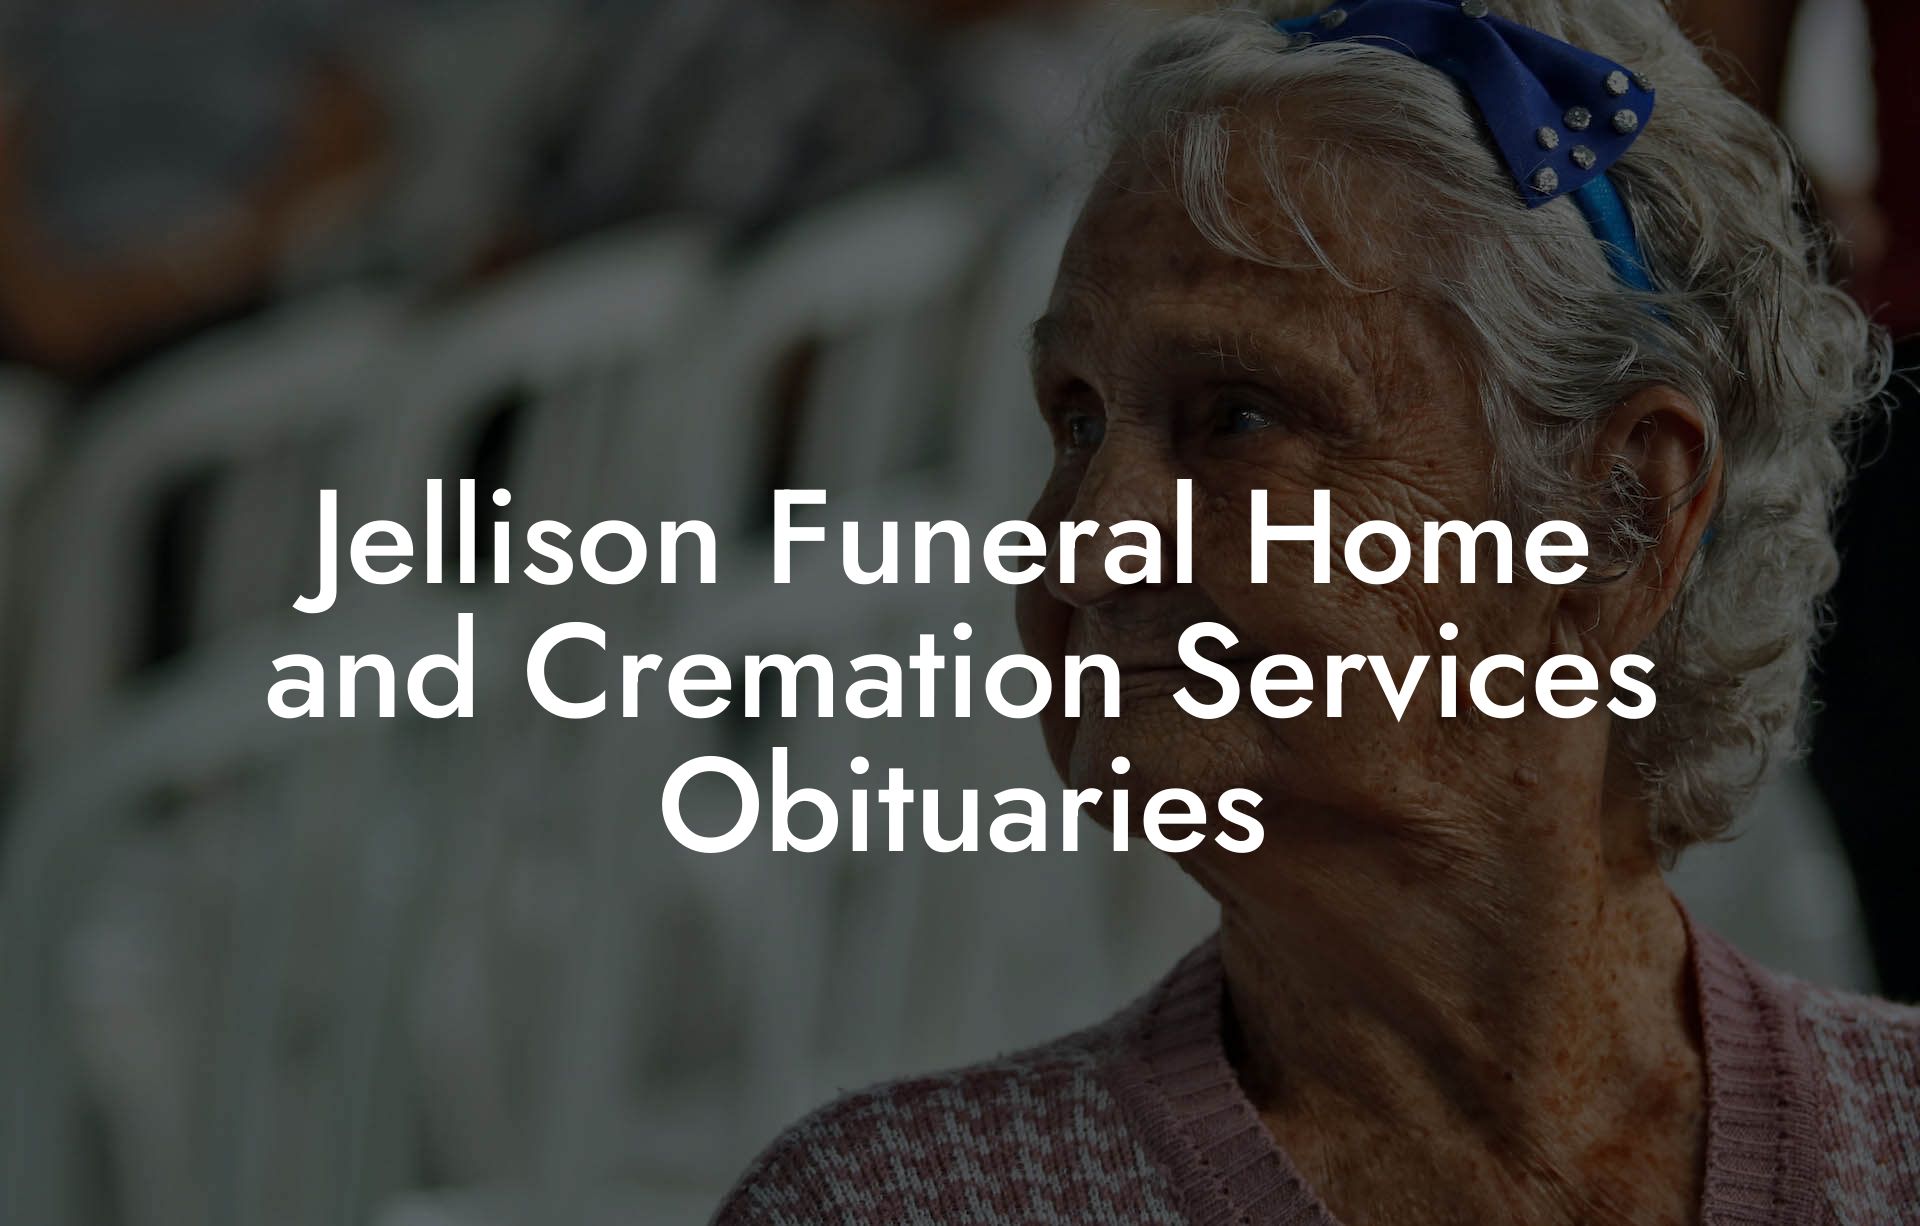 Jellison Funeral Home and Cremation Services Obituaries